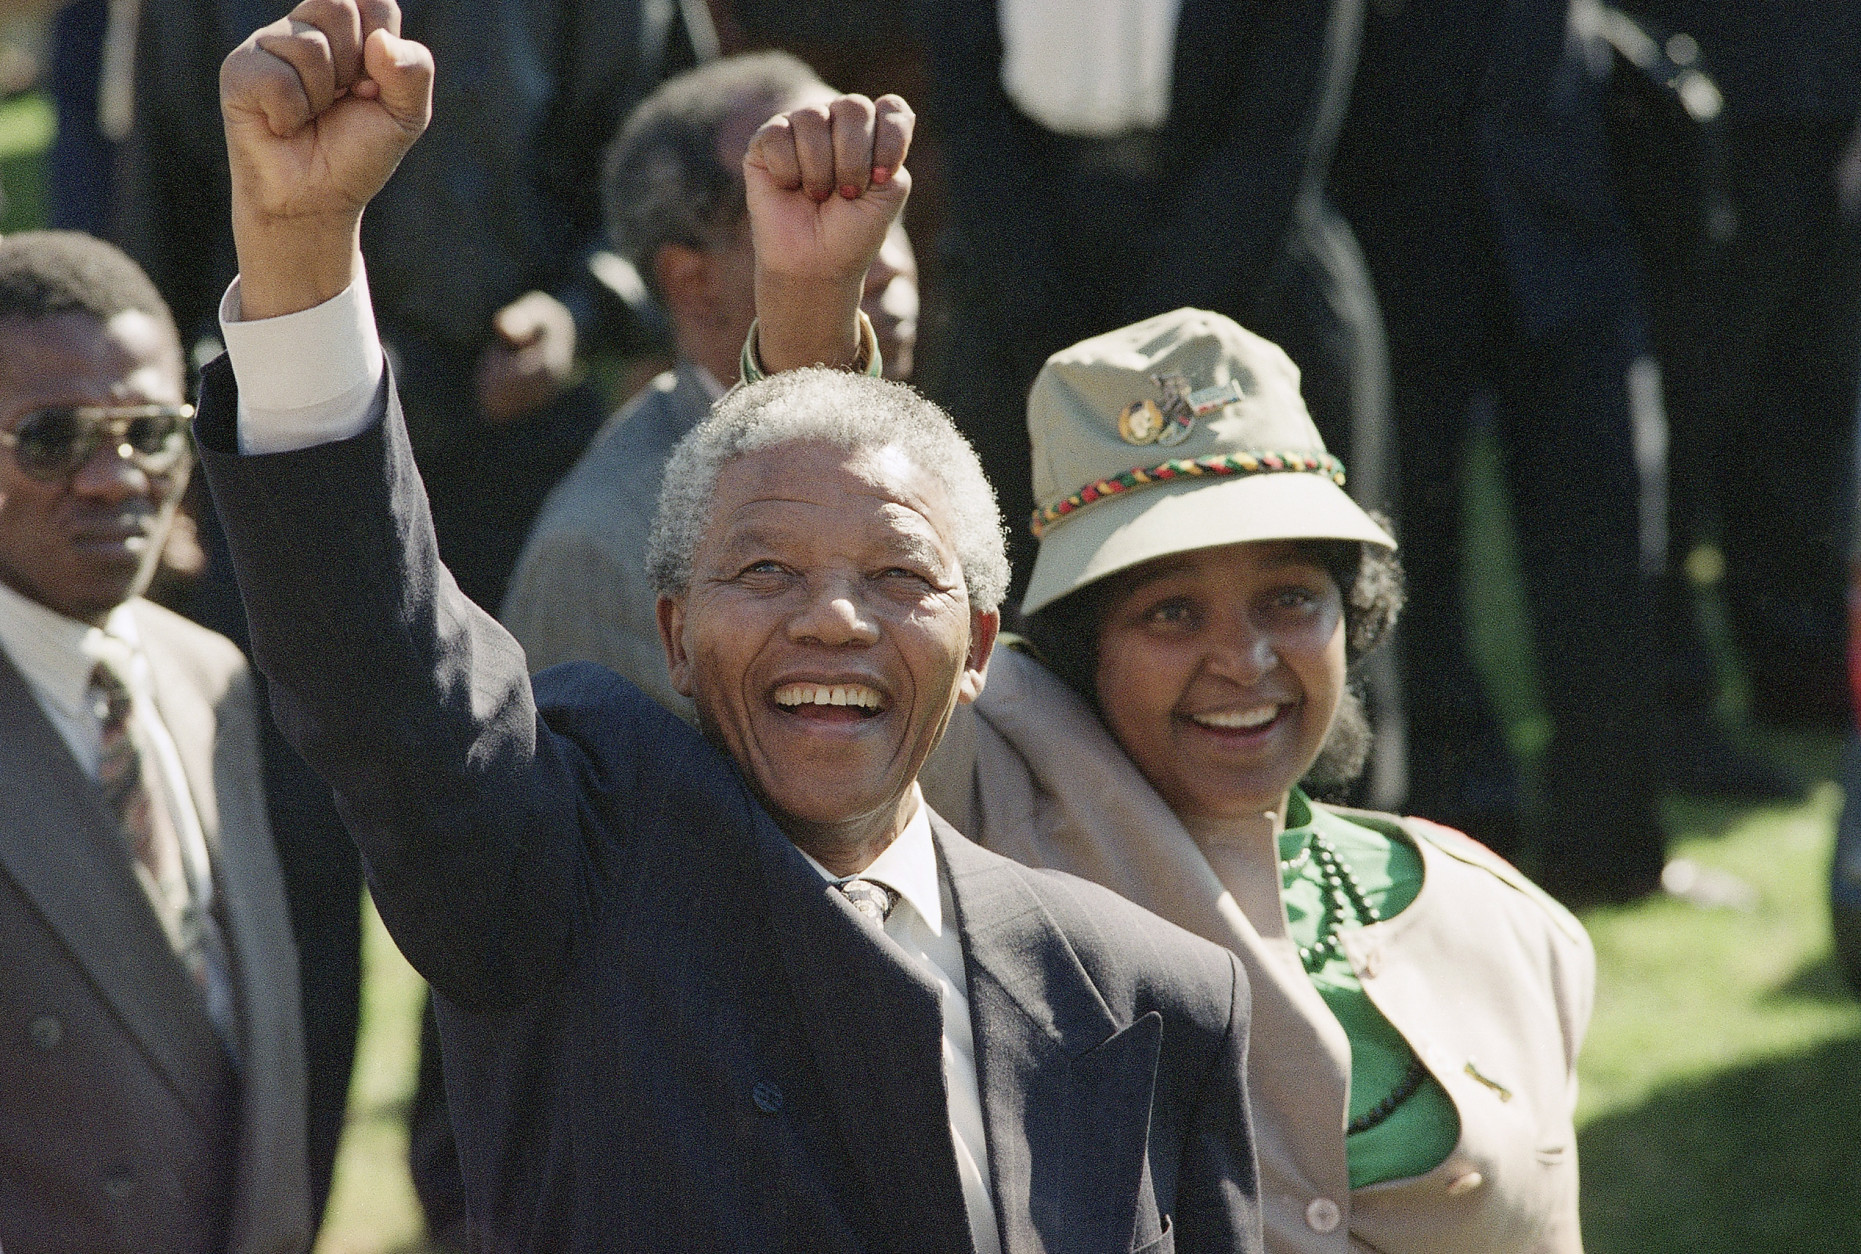 FILE - In this July 7, 1991, file photo, newly-elected African National Congress President Nelson Mandela and his wife, Winnie, greet the crowd after arriving at a rally and a week-long national ANC conference held inside South Africa for the first time in 30 years. South Africa's President Jacob Zuma said, Thursday, Dec. 5, 2013, that Mandela has died. He was 95. (AP Photo/John Parkin, File)